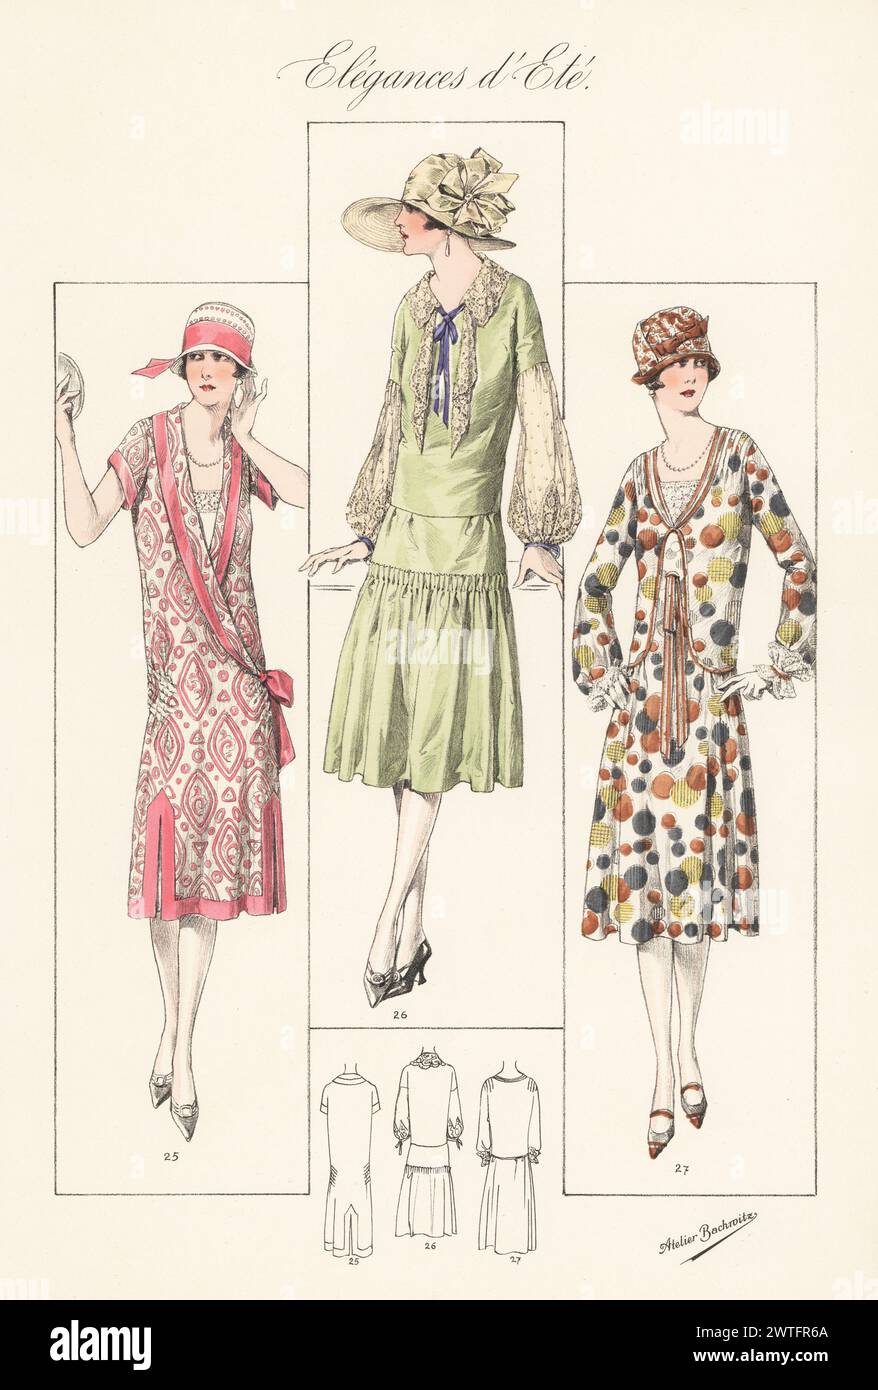 Flappers in summer hats and dresses. Patterned foulard dress with crossed shawl 25, style frock in taffetas with lace collar and sleeves 26, foulard print frock with silk collar and necktie 27. Handcoloured lithograph by Atelier Bachwitz from Modell-Kleider fur den Hochsommer, Elegances d’Ete, Fashions for the Hot Season, Atelier Bachwitz AG, Vienna, 1926. Stock Photo